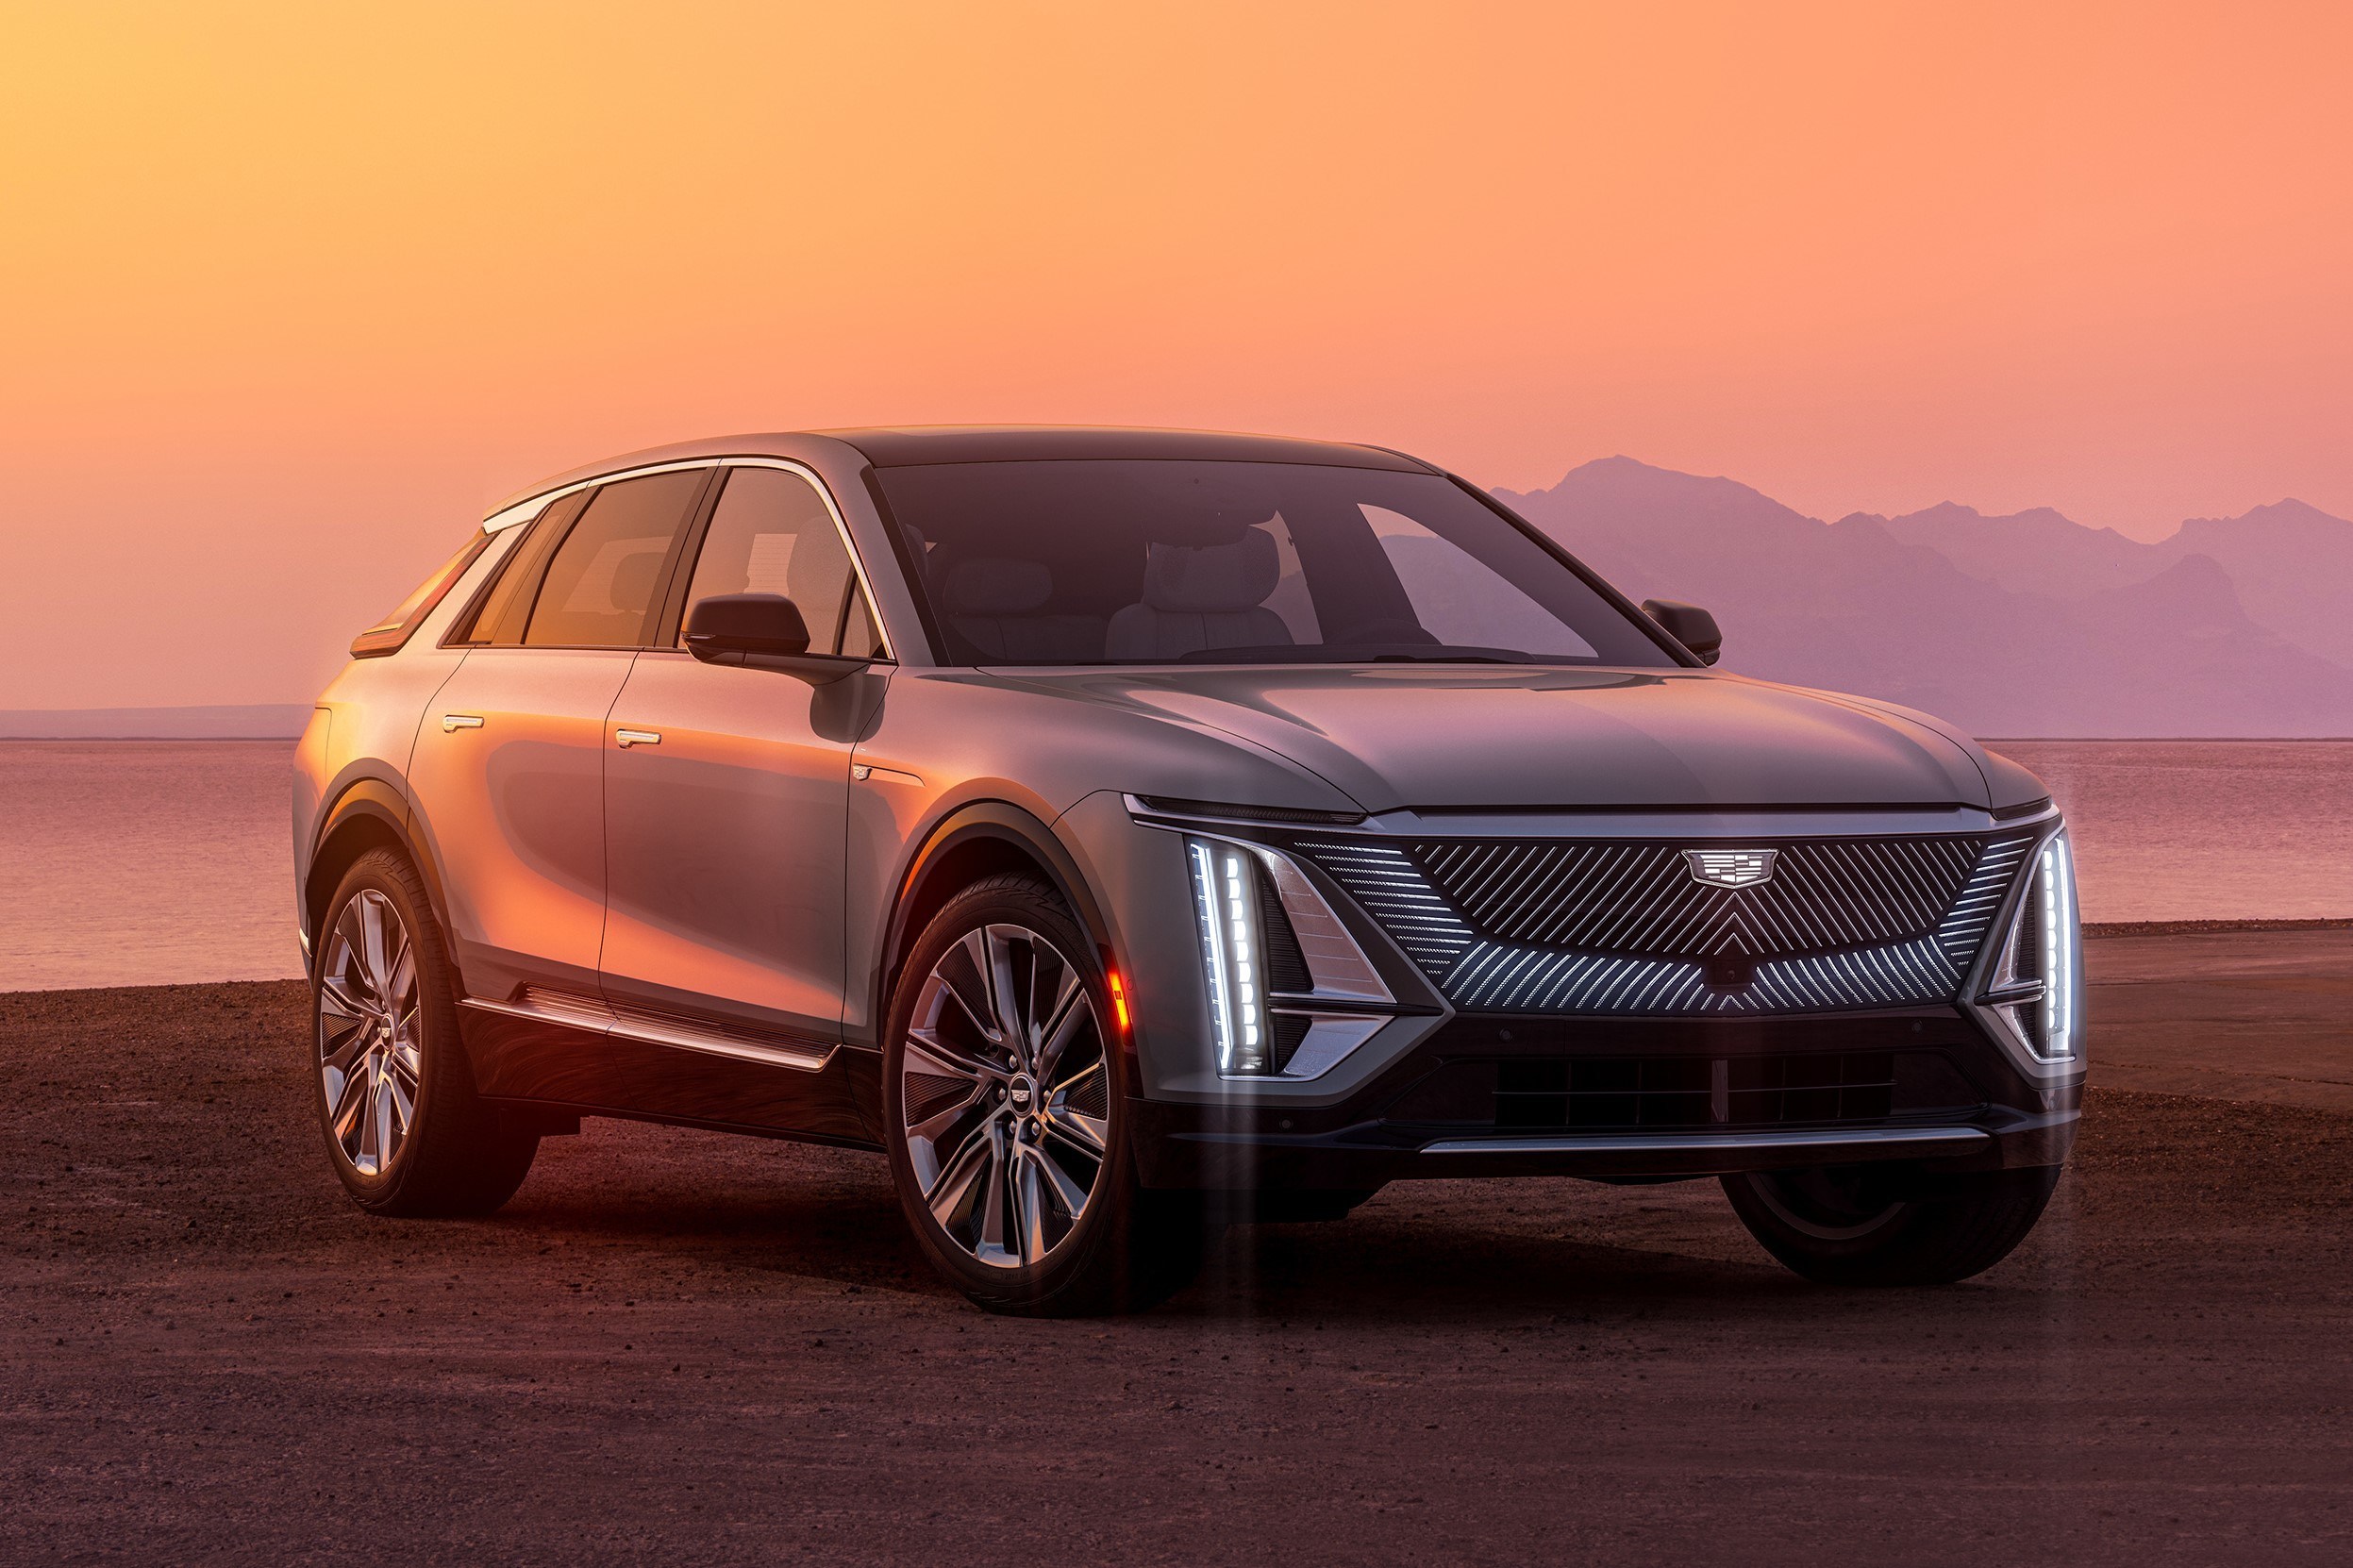 Cadillac to Debut an EV in its V-Series